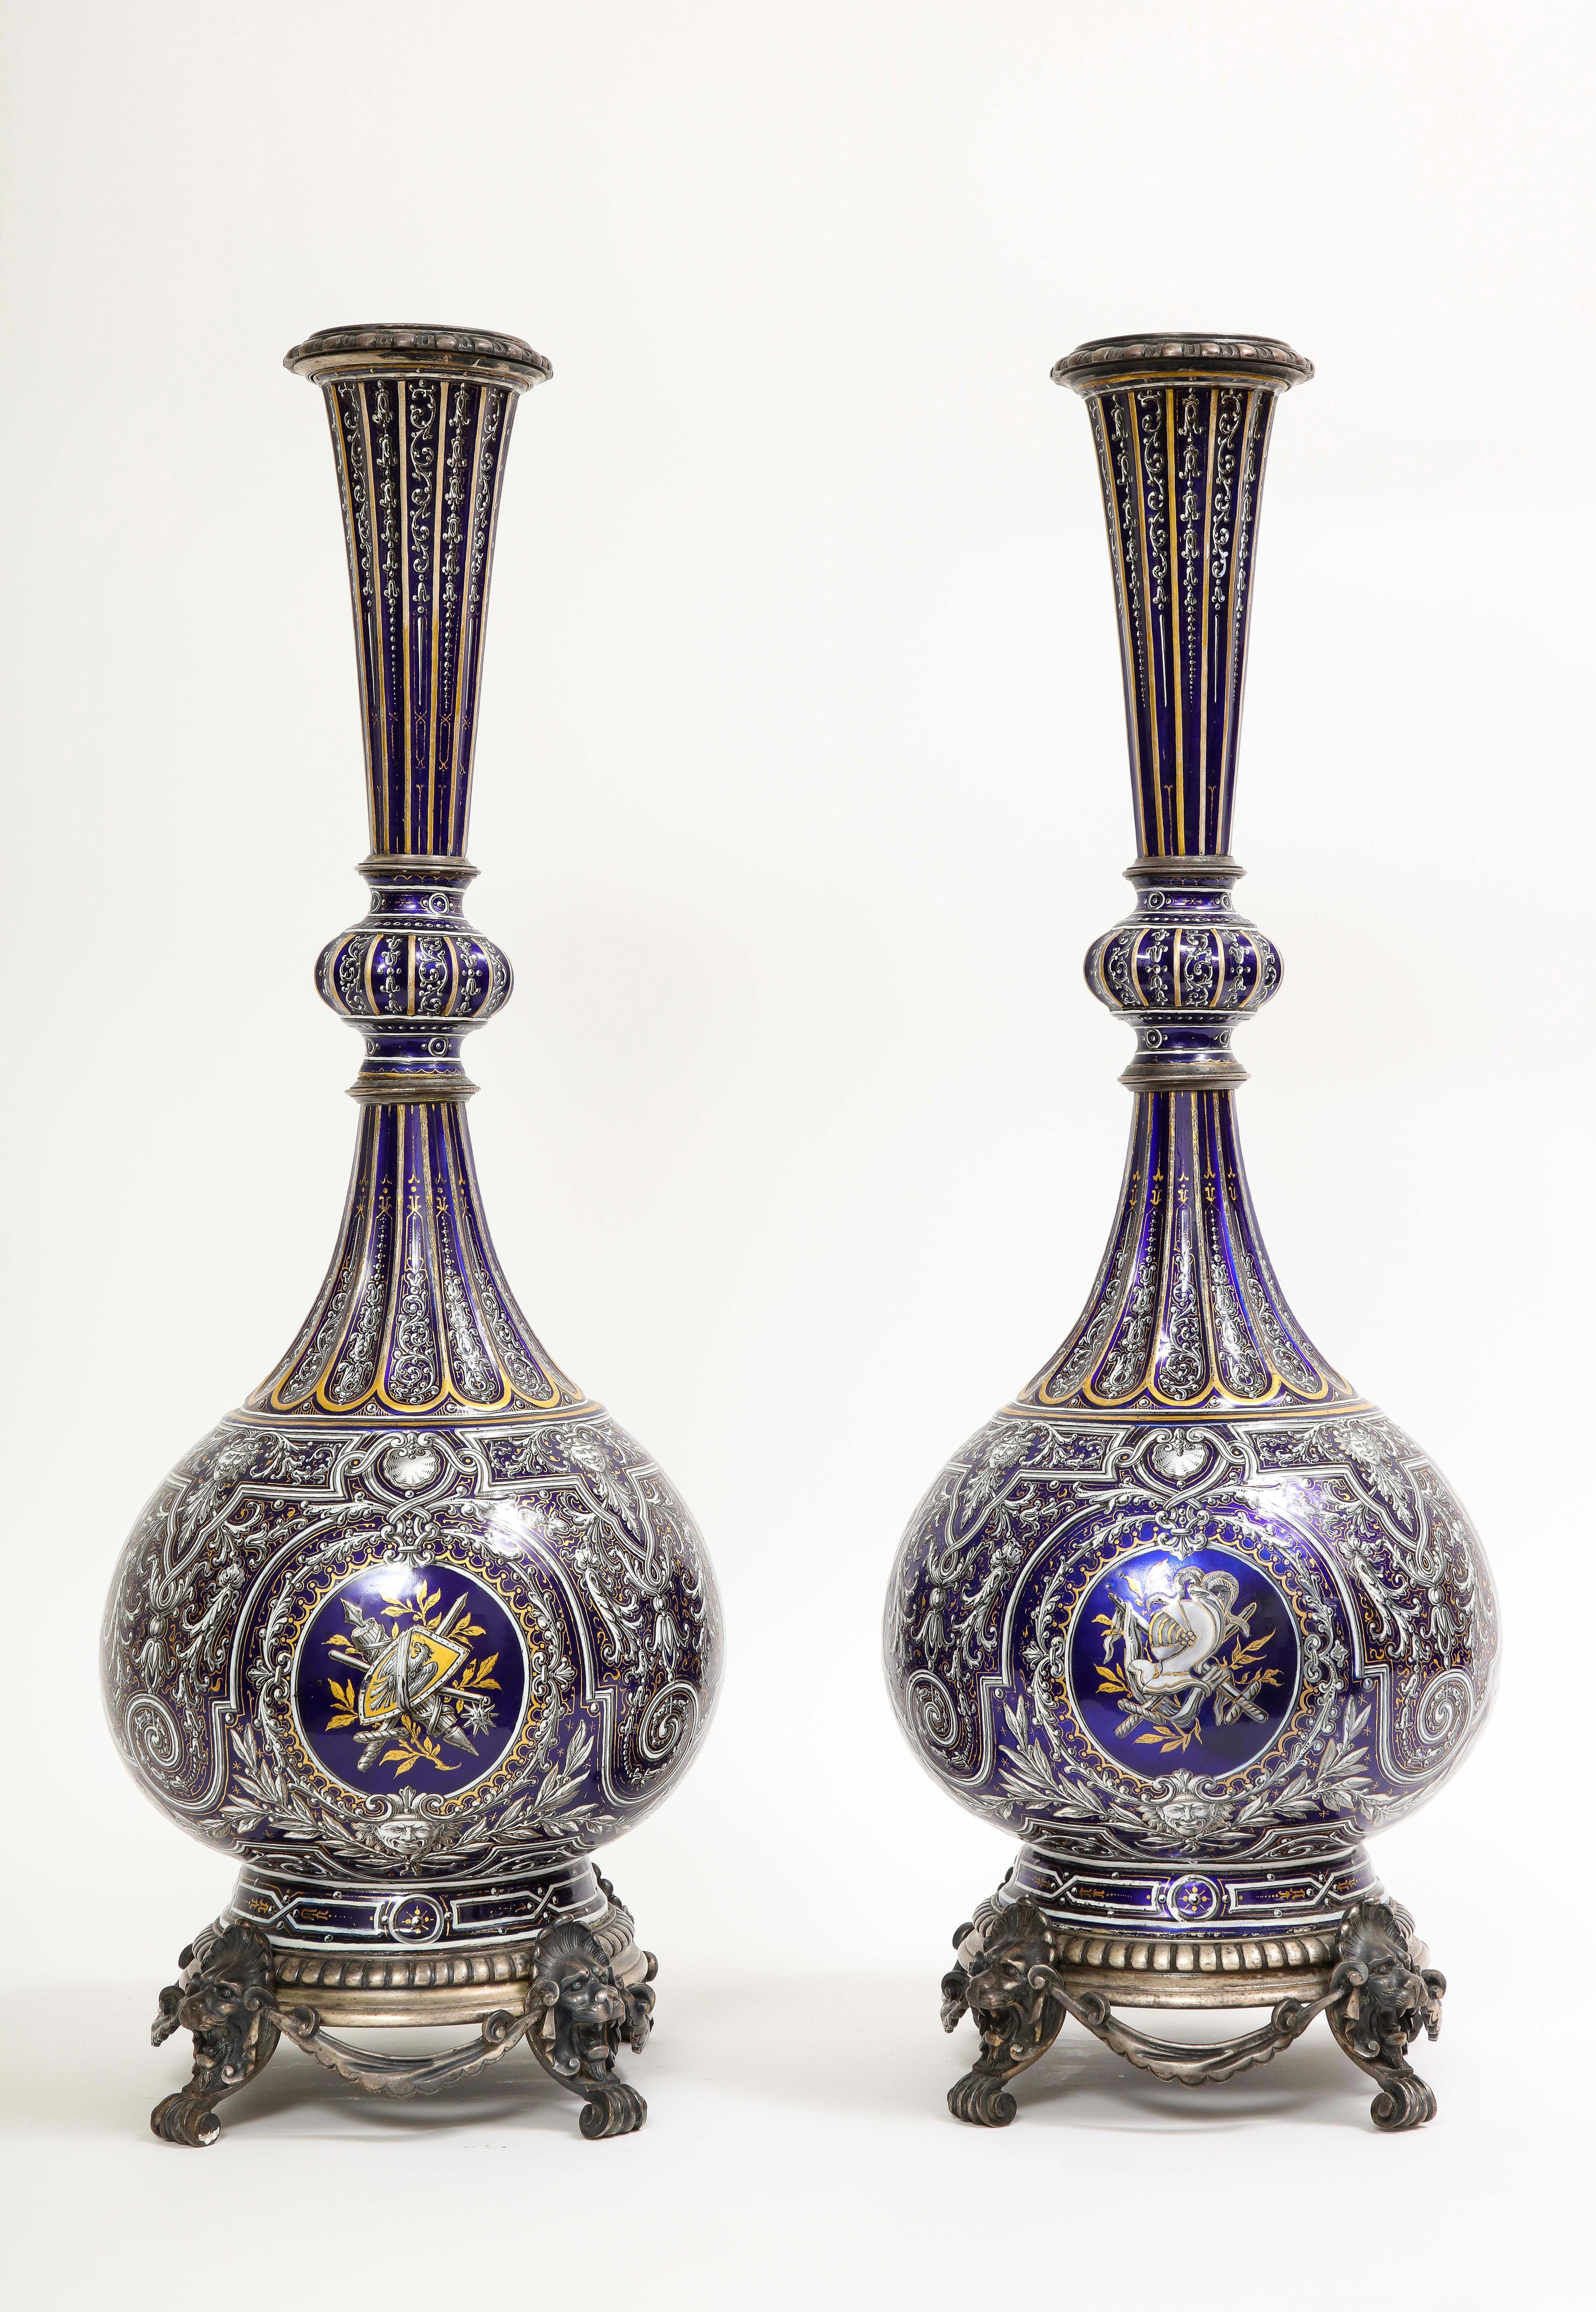 A fantastic and large pair of French 19th century silvered bronze mounted limoges enameled copper armorial vases. Each vase has a bulbous body with a wasting neck. The tops and bases of the vases are mounted on silvered bronze mounts, each with